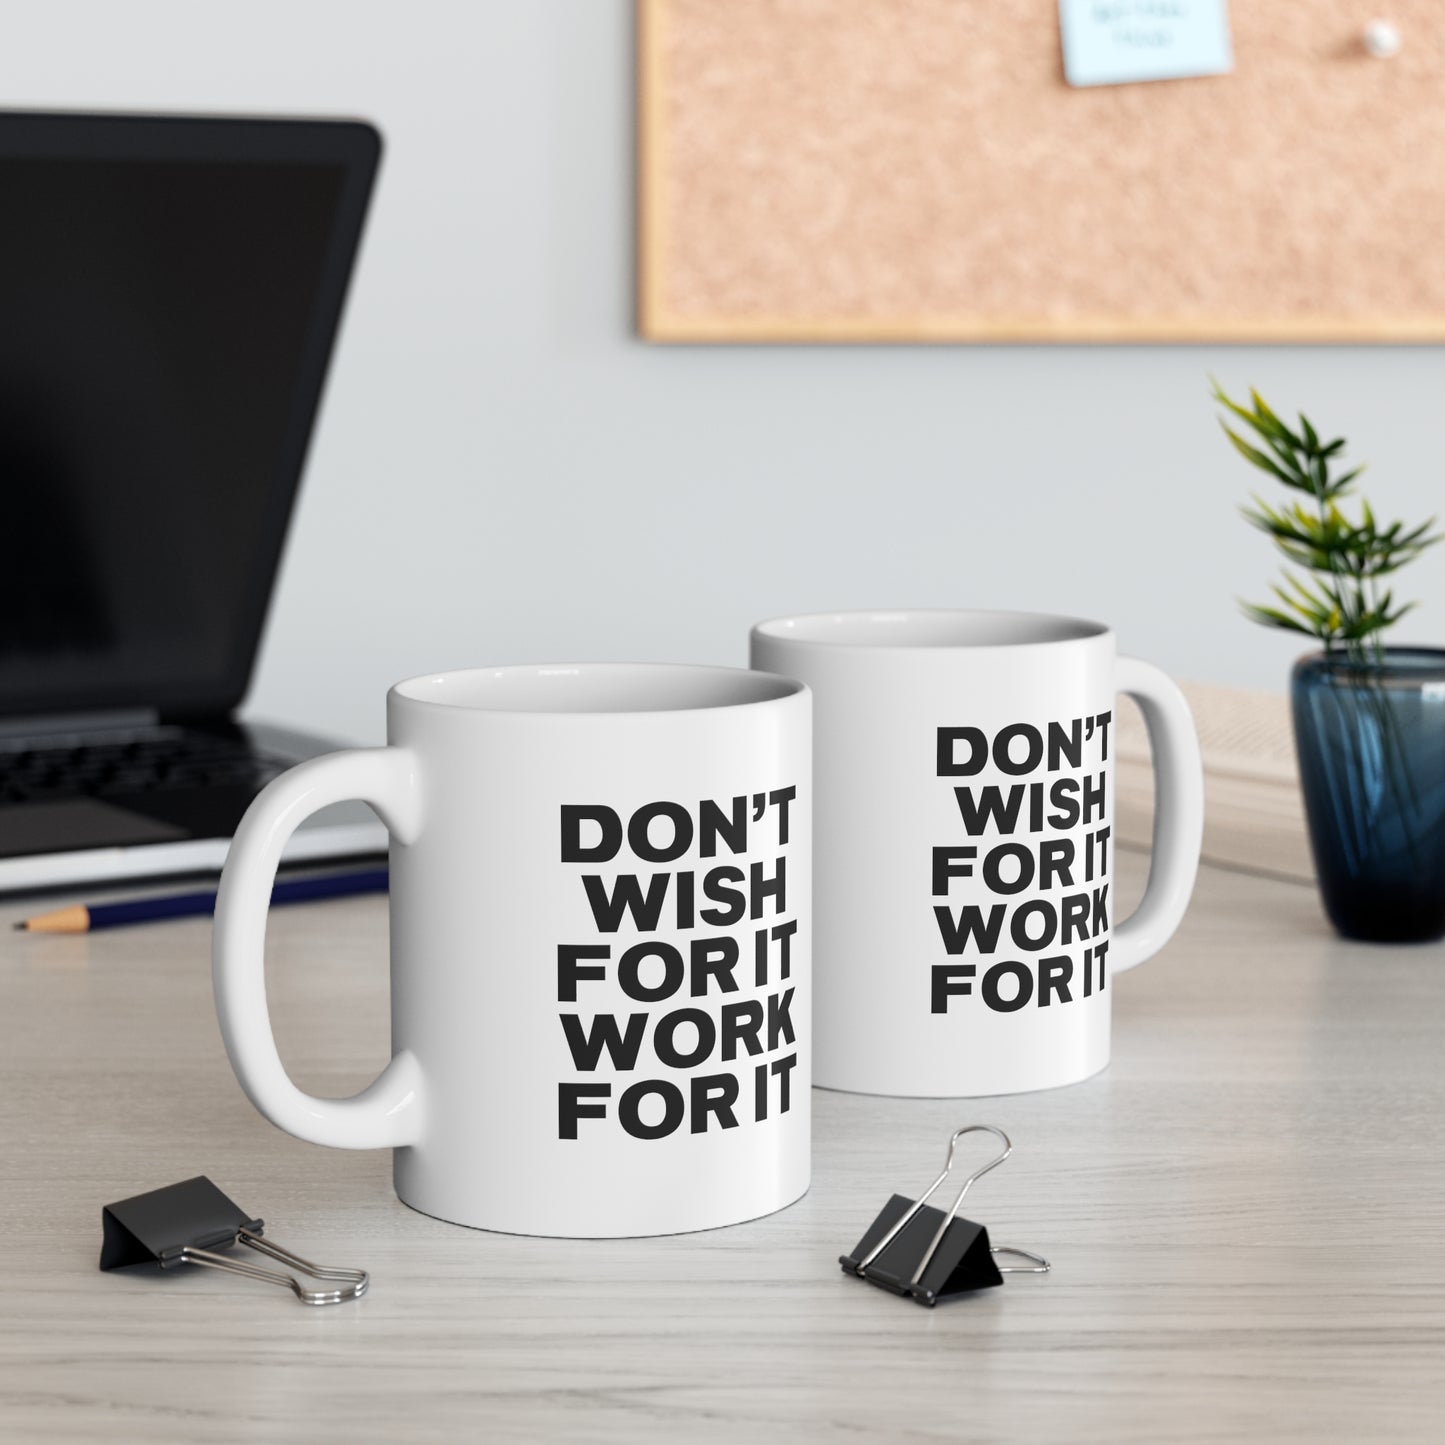 Don't Wish for It, Work for It Coffee Mug 11oz